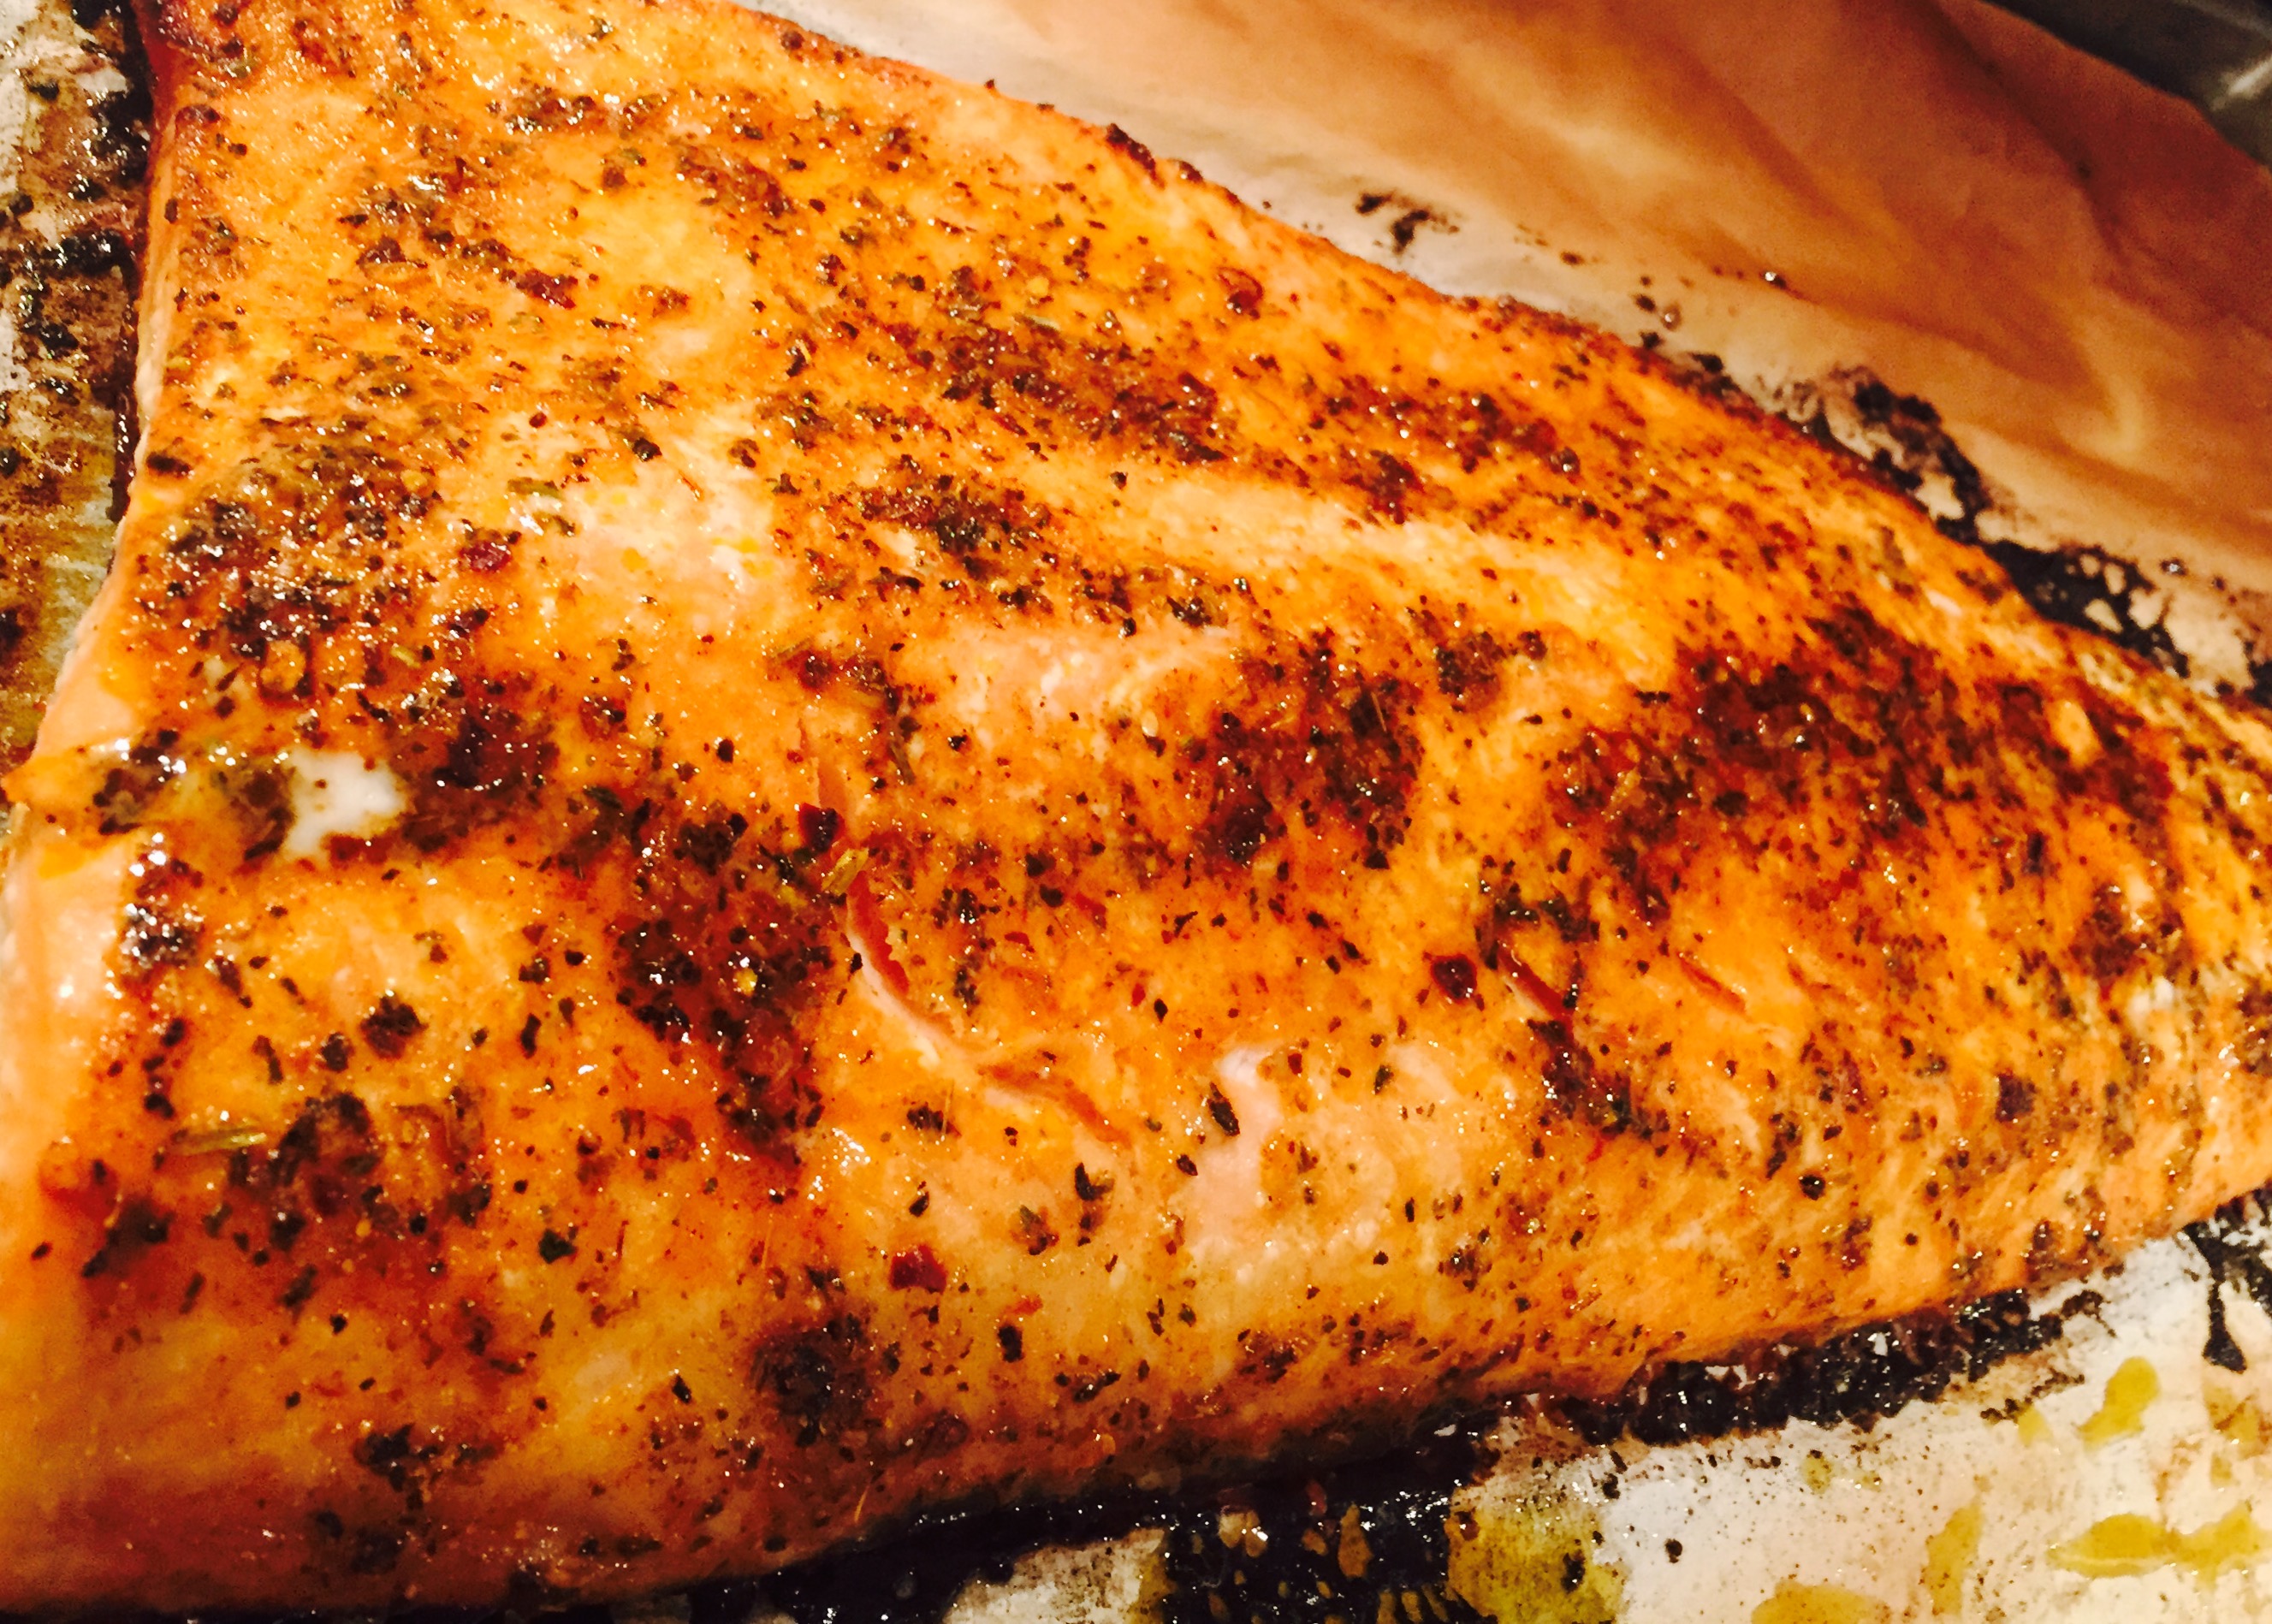 Cajun side of salmon, baked then broiled to perfection